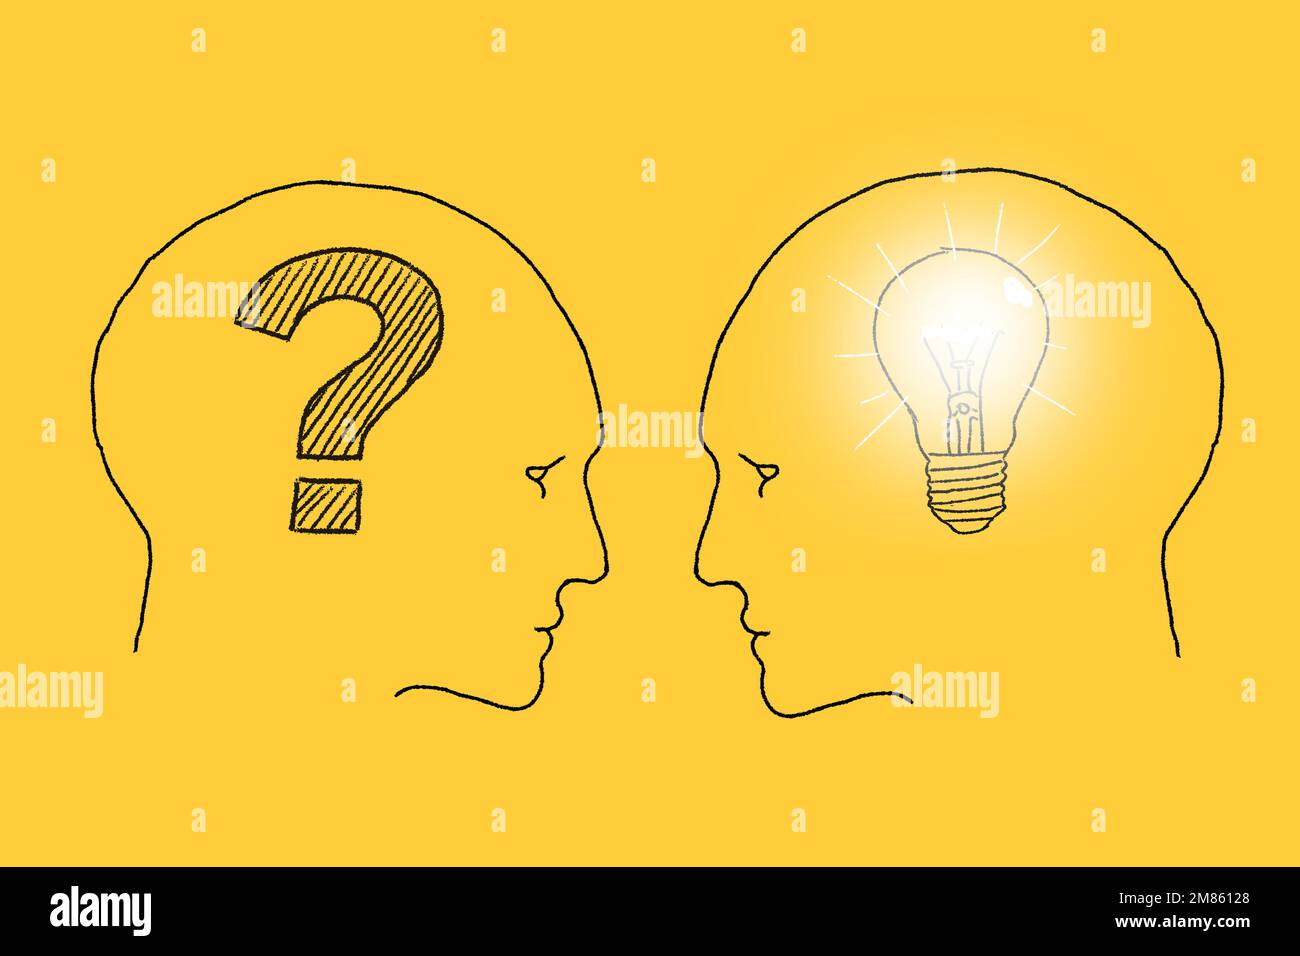 Two human heads face to face. Left head with question mark inside and right head with lightbulb inside. Illustration drawn on a yellow background. Ide Stock Photo